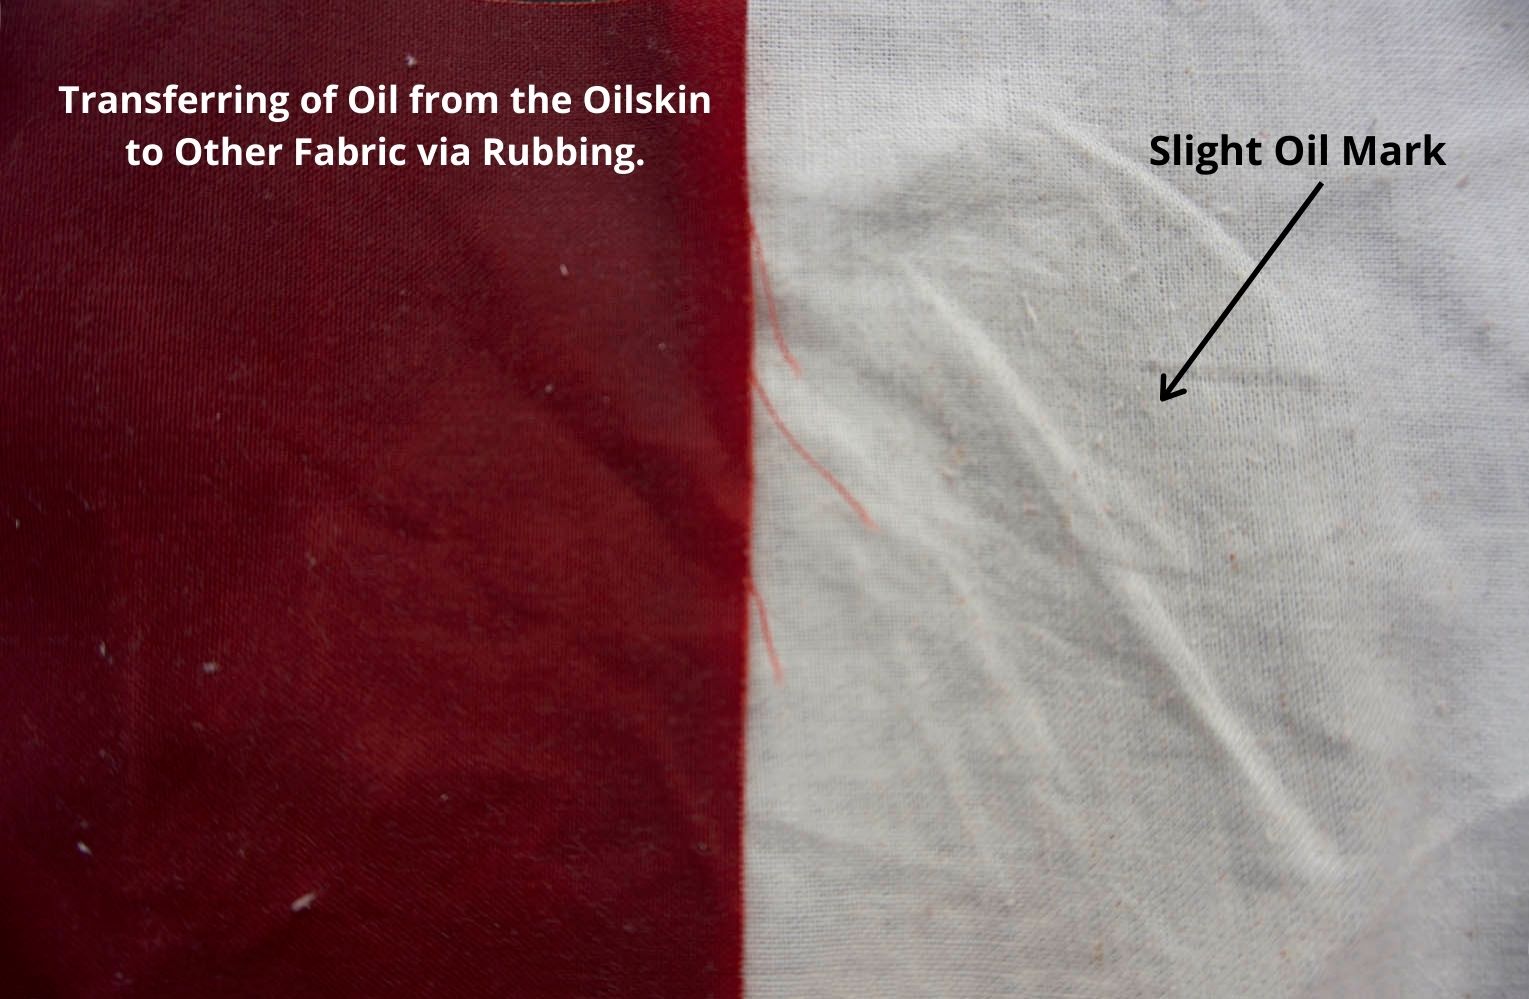 side by side photo of the oilskin. The oilskin is on the left hand side and the muslin is on the right hand side. it shows a slight discolouration of the muslin